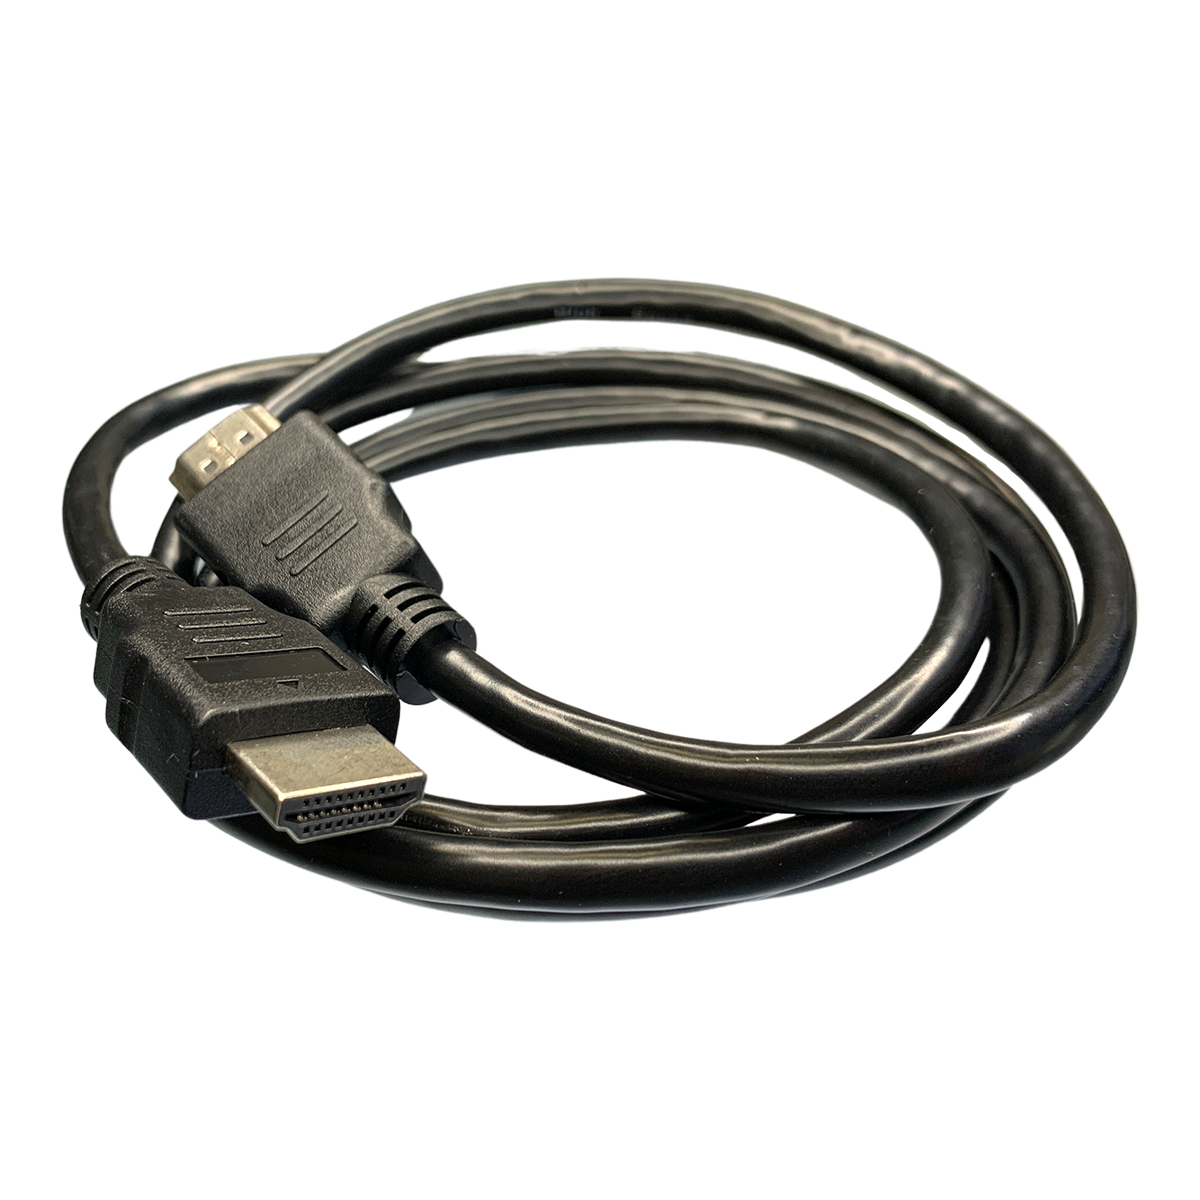 Sony PlayStation 5 PS5 HDMI Cable